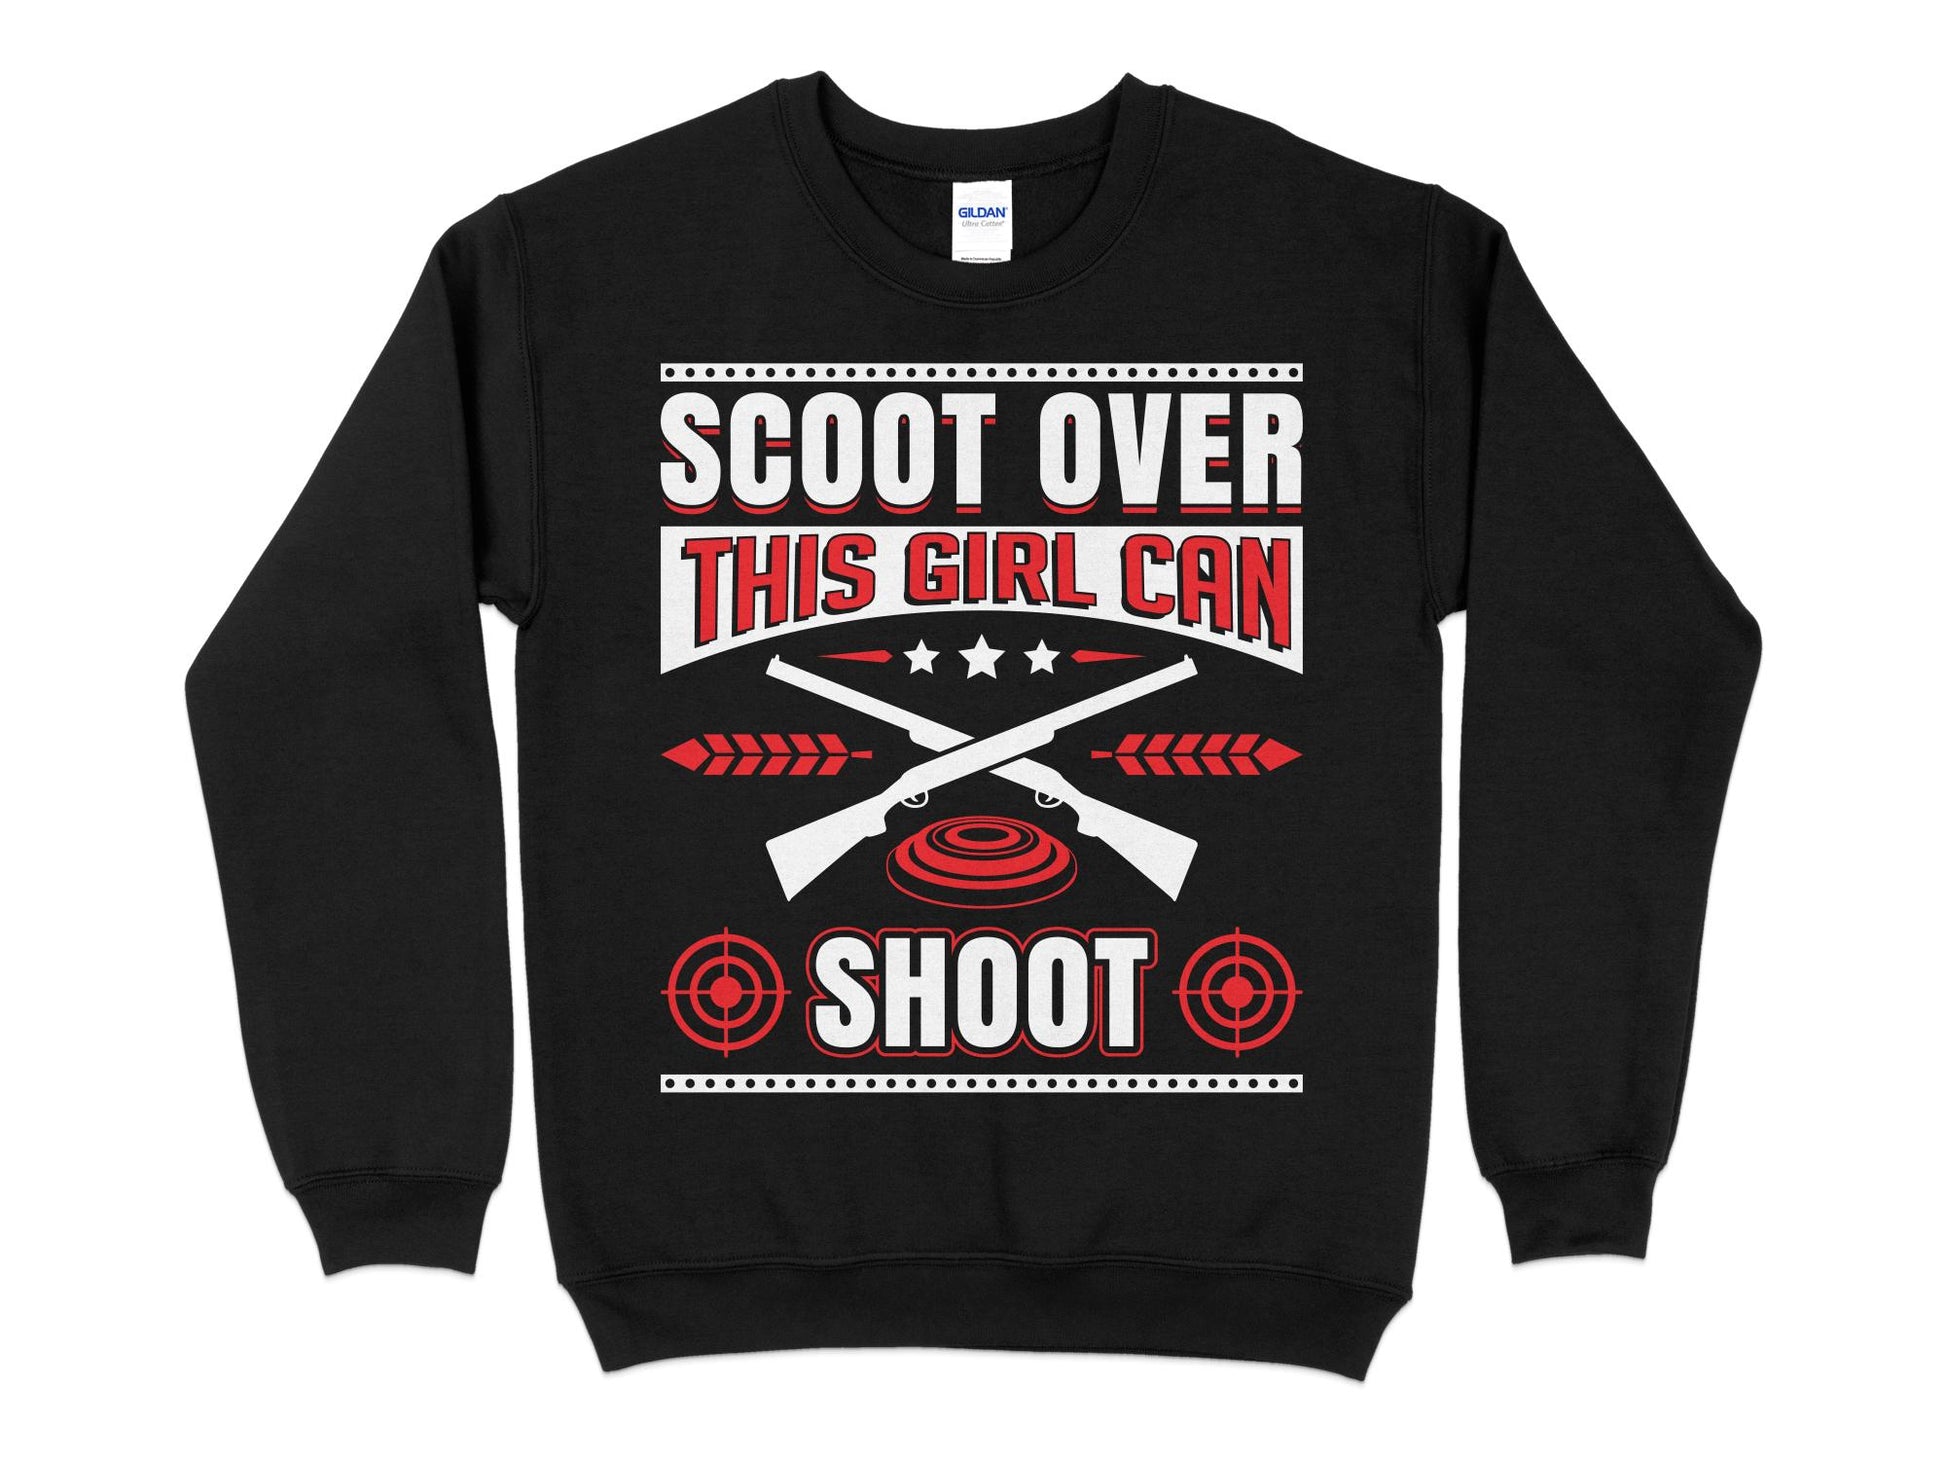 Trap Shooting Sweatshirt - Scoot Over This Girl Can Shoot, black